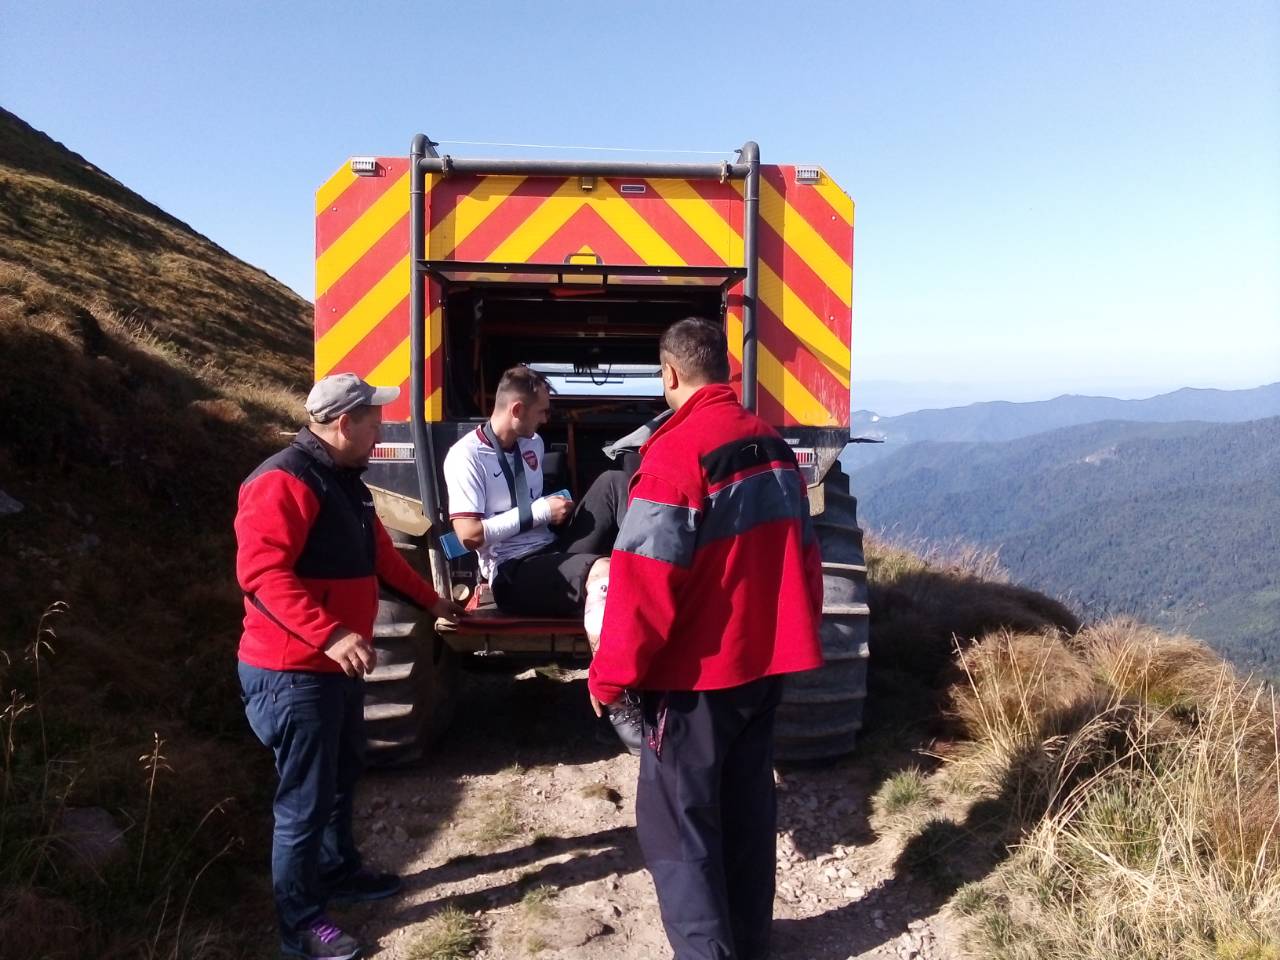 Rescuers and SHERP saved the life in Zakarpattia, Ukraine